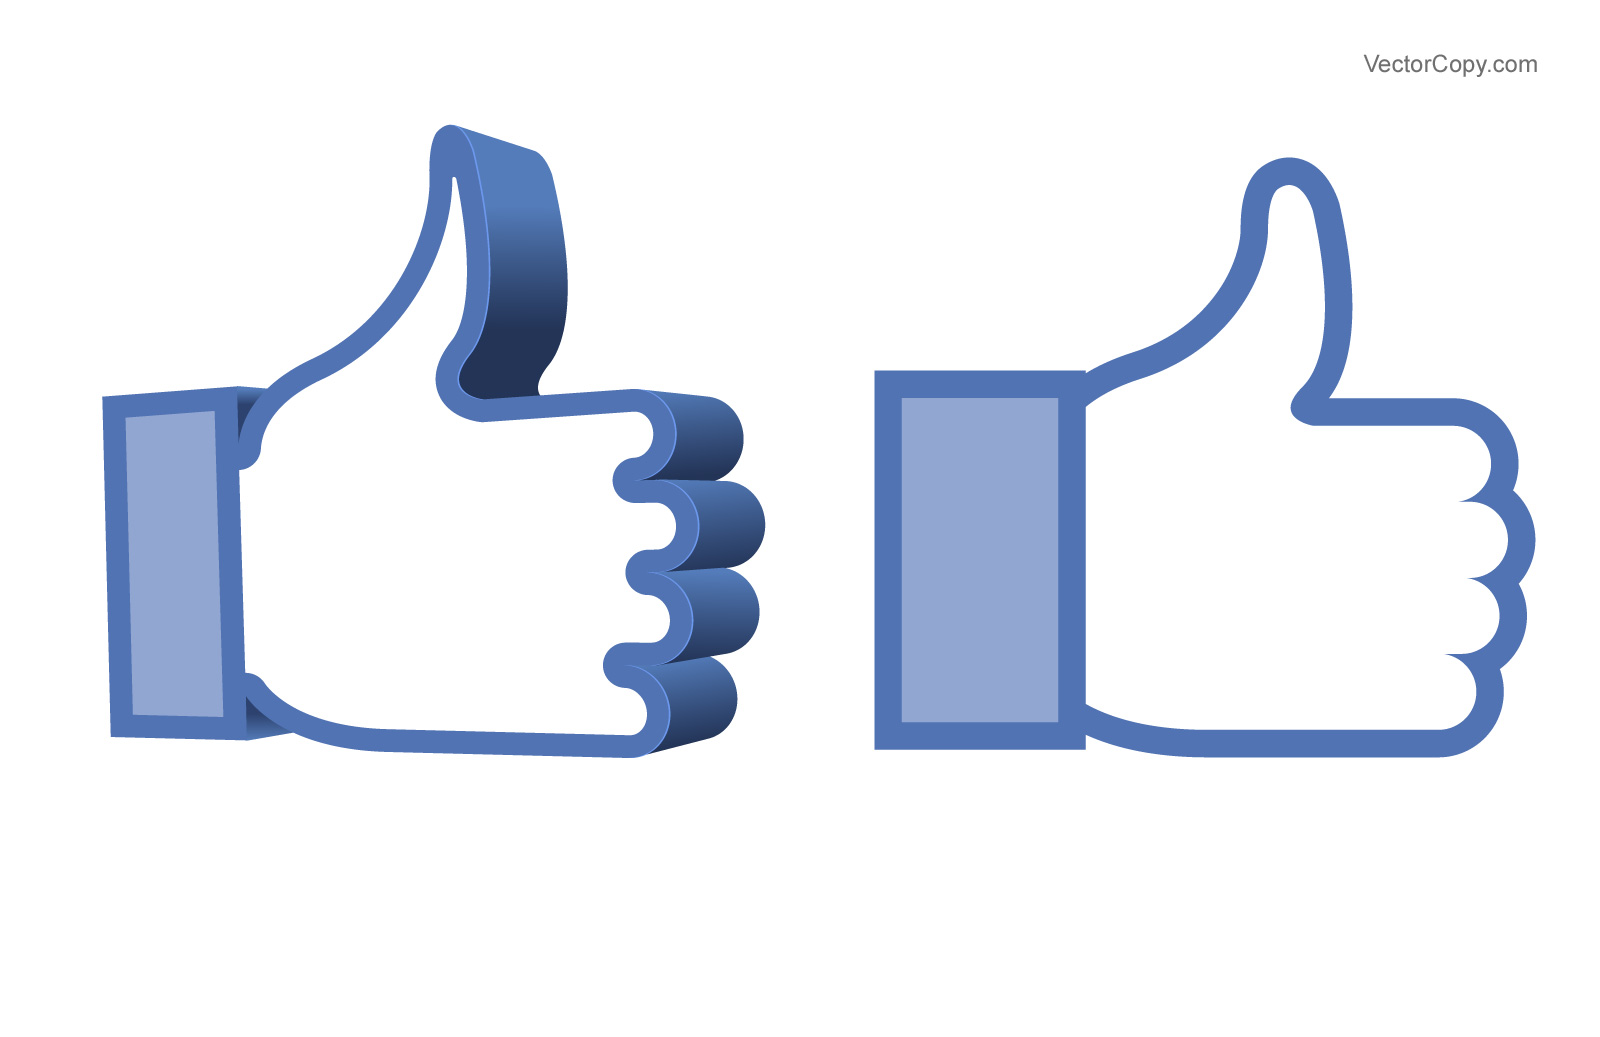 Facebook Like Icon Clipart